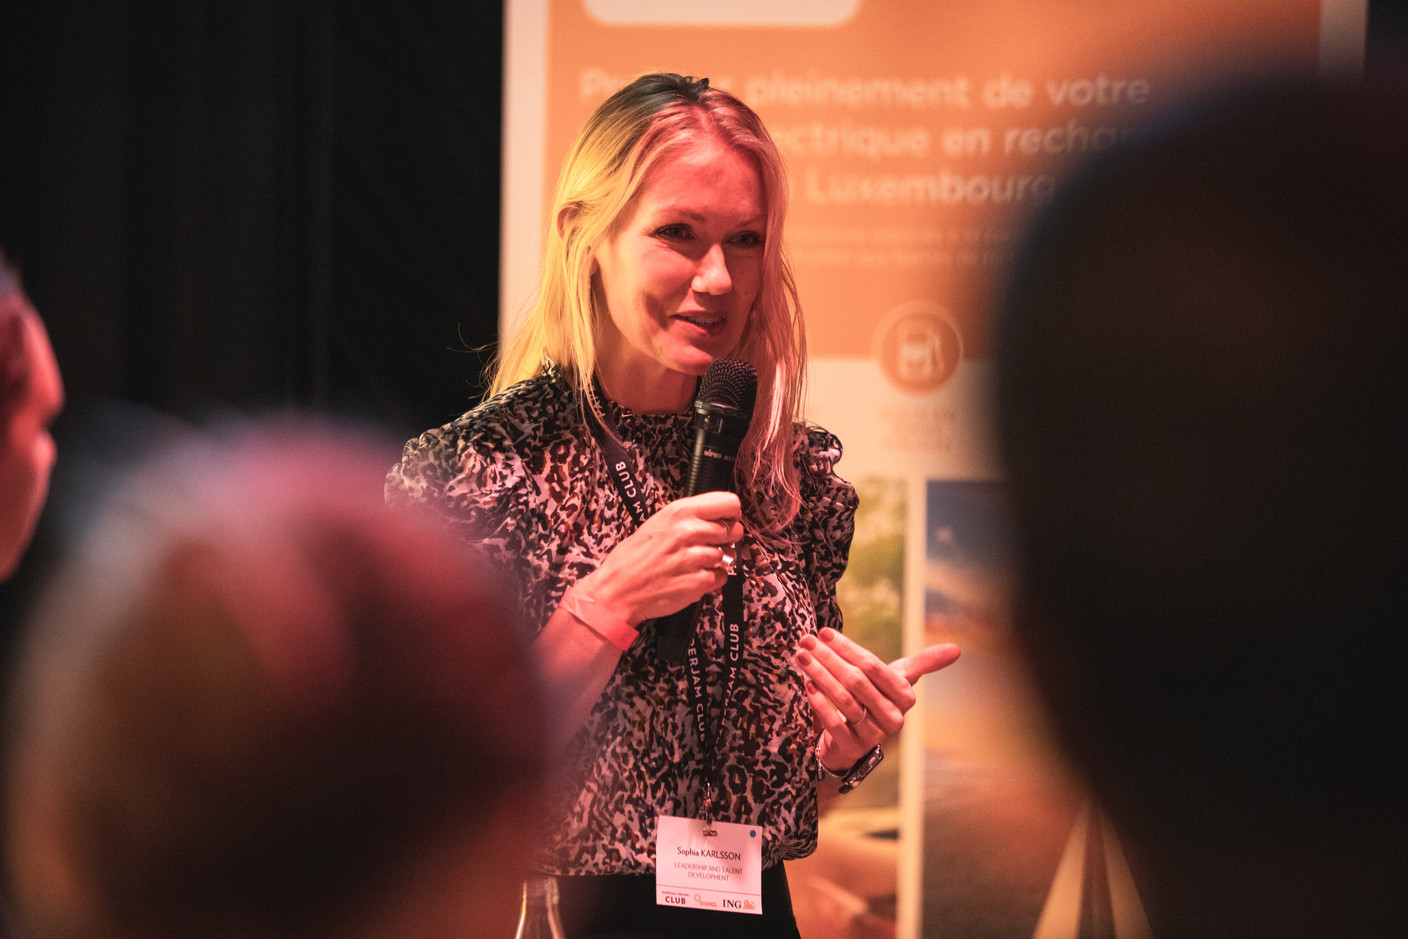 Sophia Karlsson, a leadership trainer and talent coach, are seen speaking on the “Delano Live: How to move up without burning out?” panel, 16 November 2021. Photo: Simon Verjus/Maison Moderne